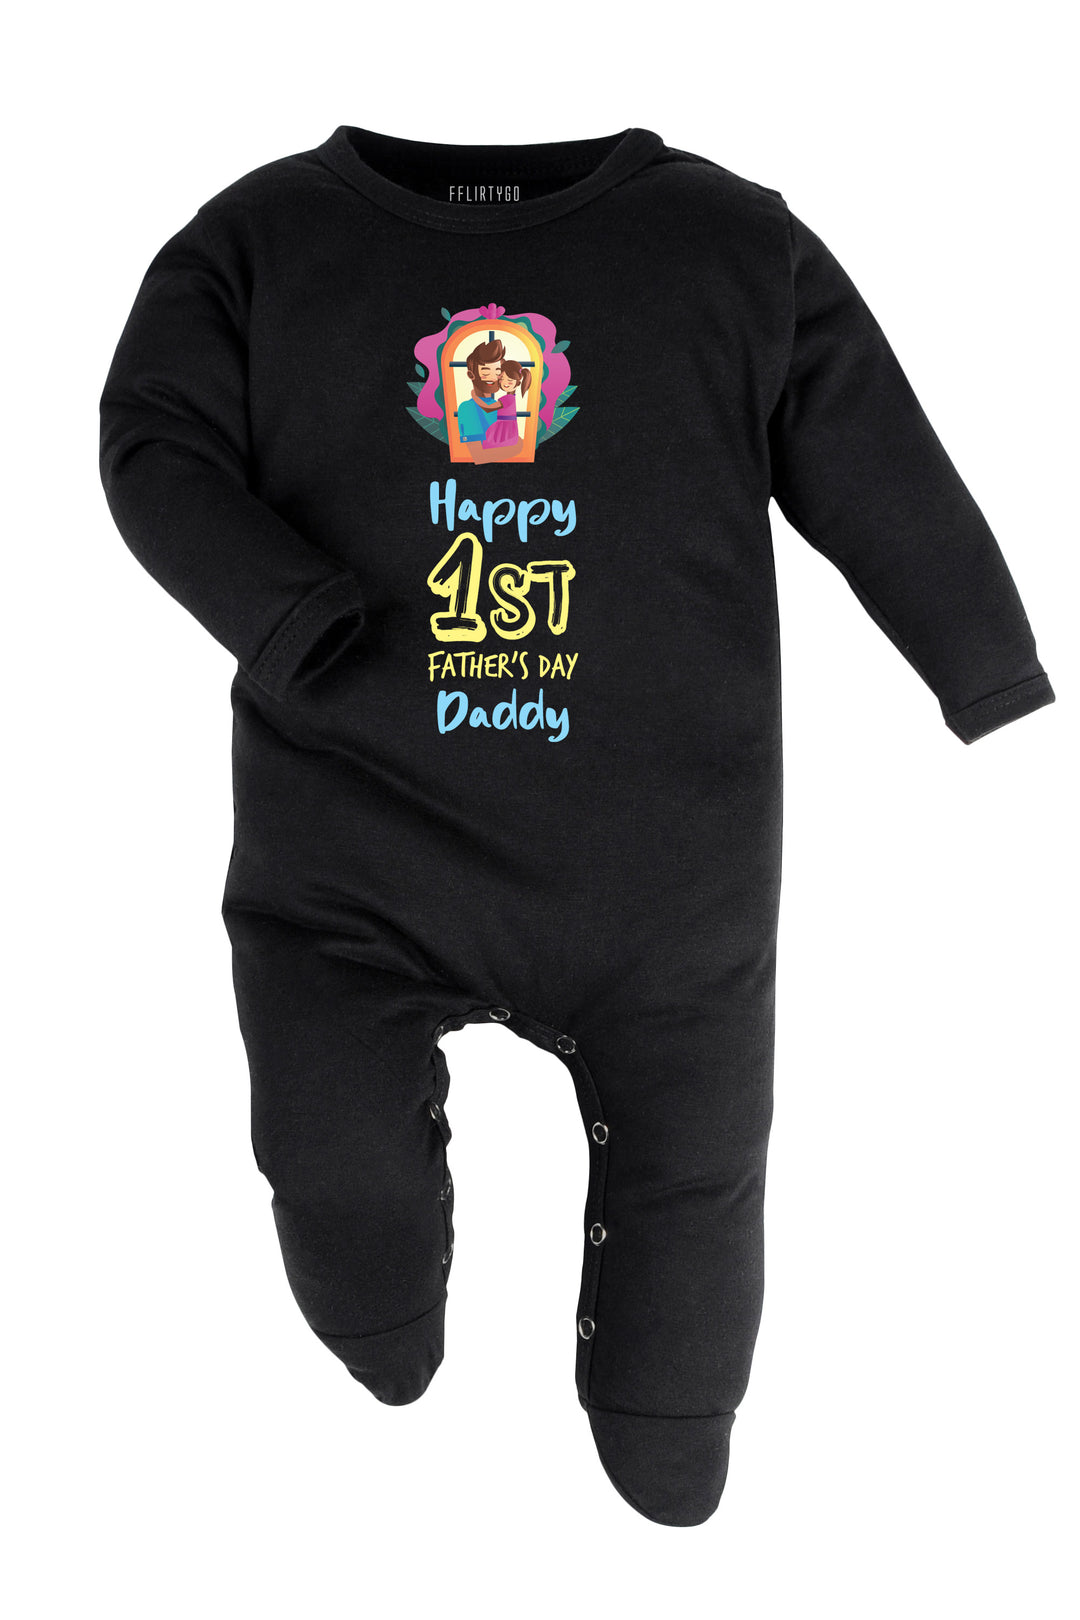 Happy 1st Father's Day Daddy Baby Romper | Onesies